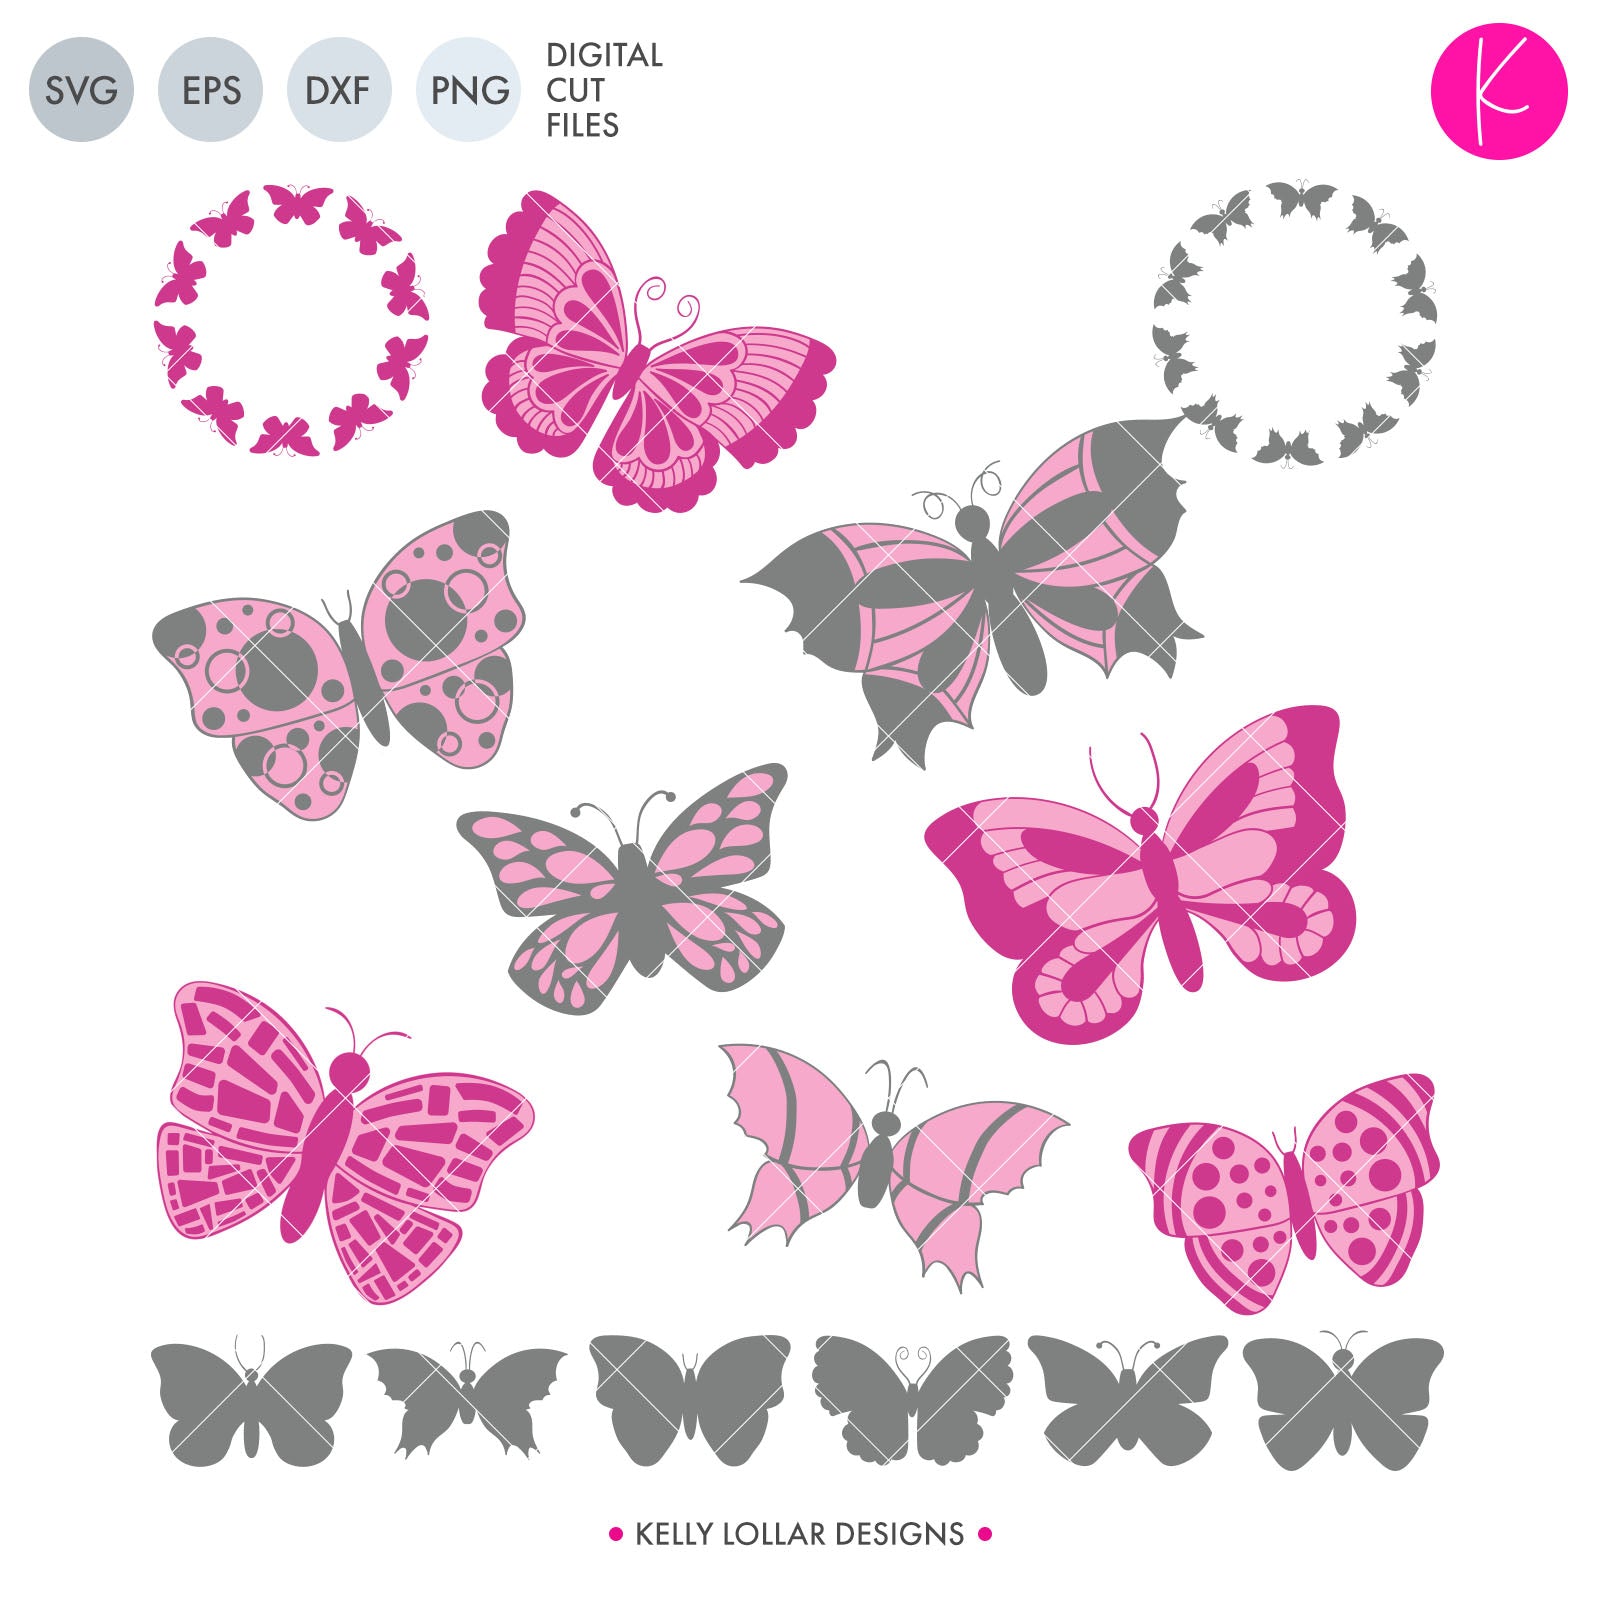 Download Butterfly SVG Files - 16 piece pack | Kelly Lollar Designs